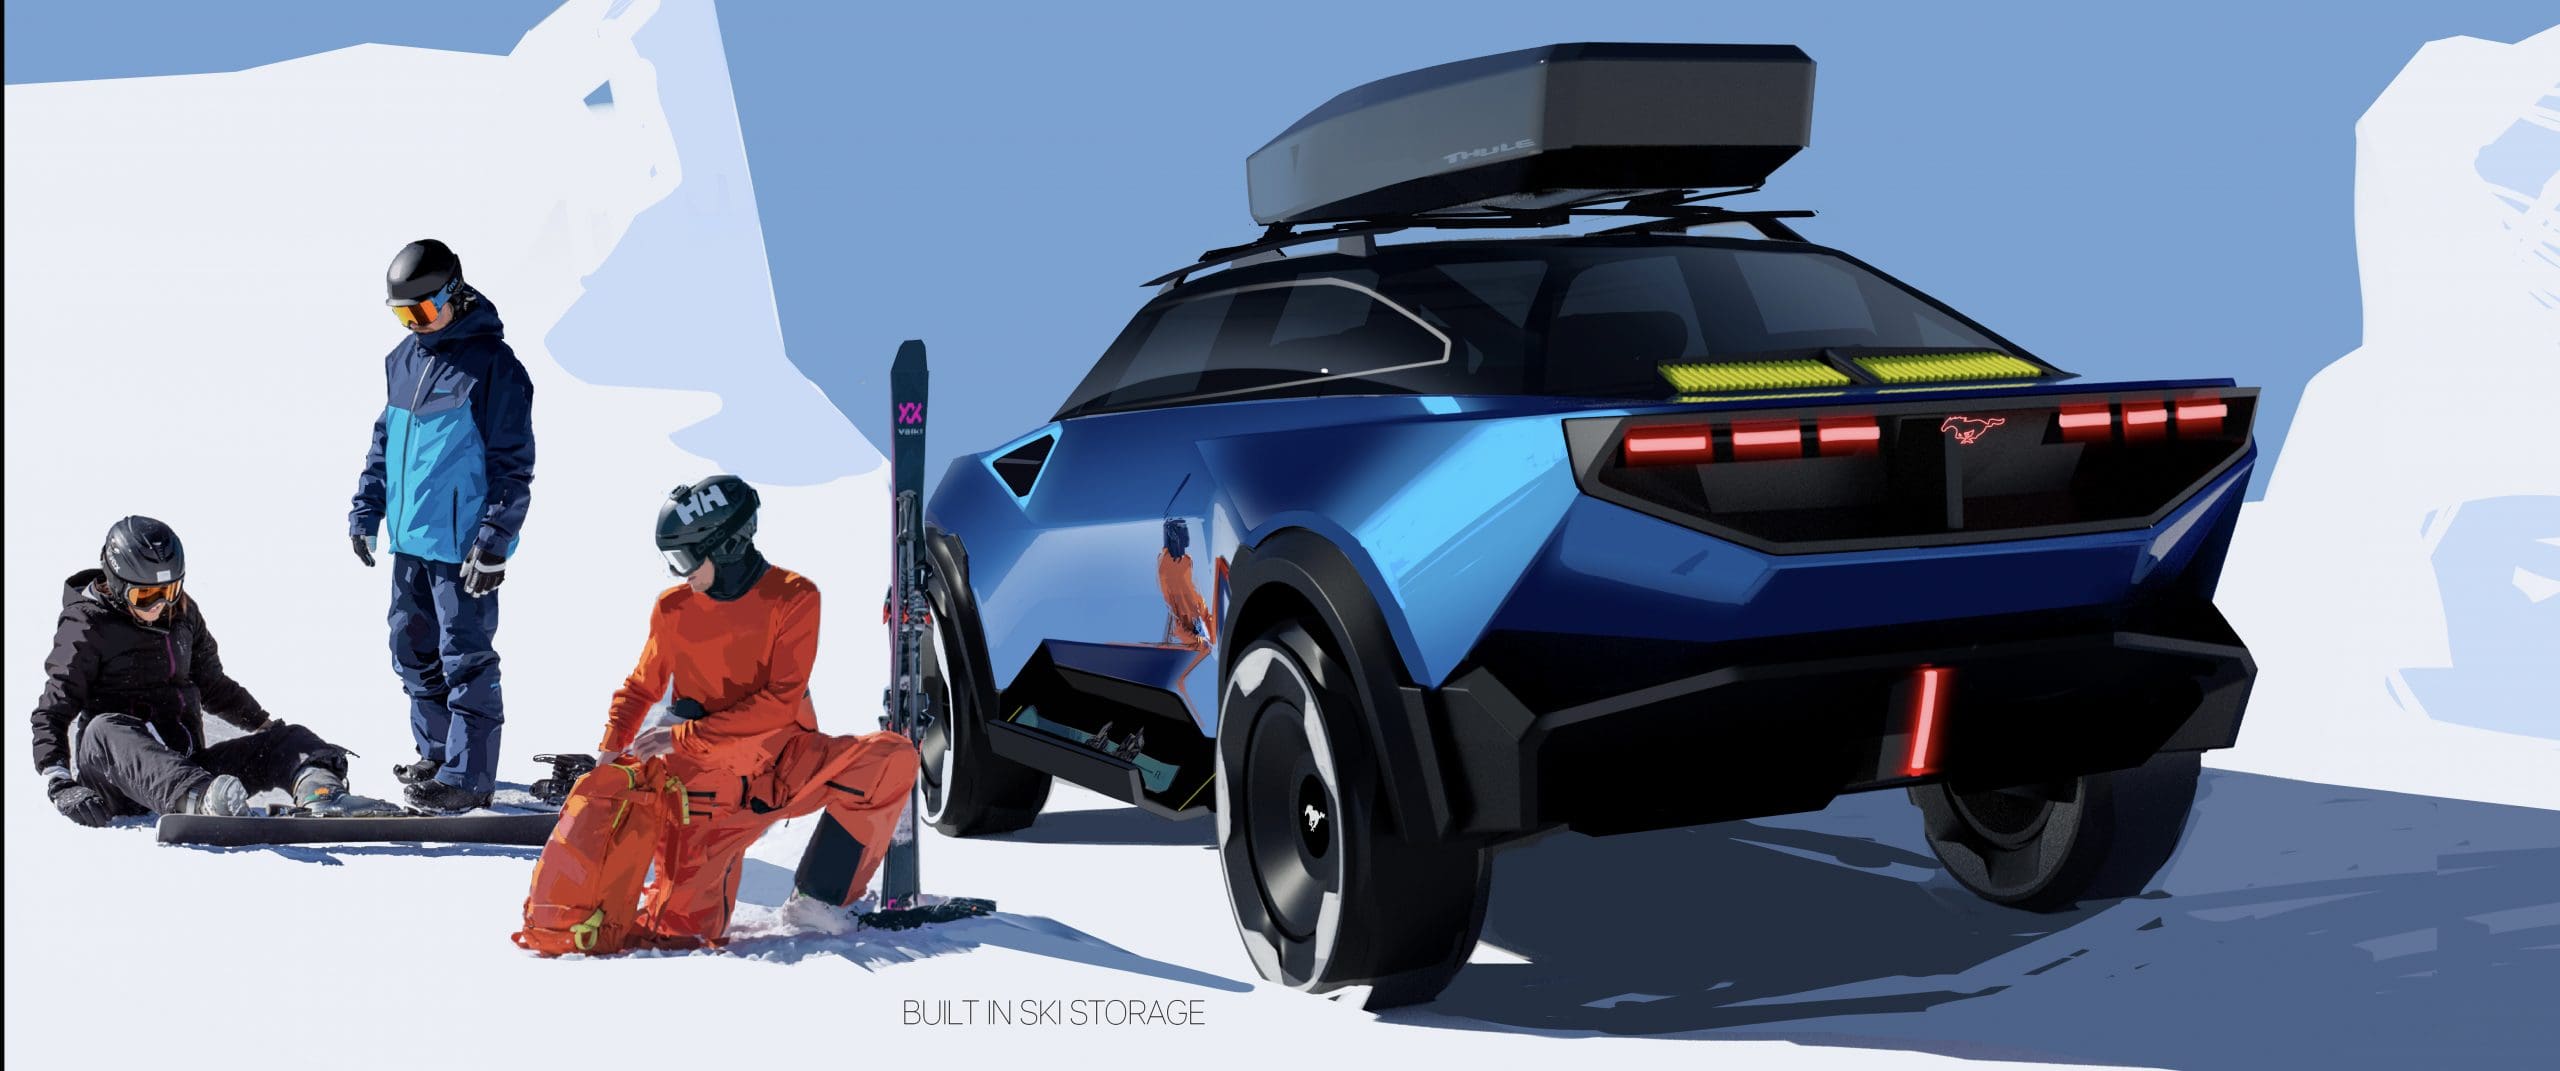 rendering of a blue car with a luggage rack in the snow